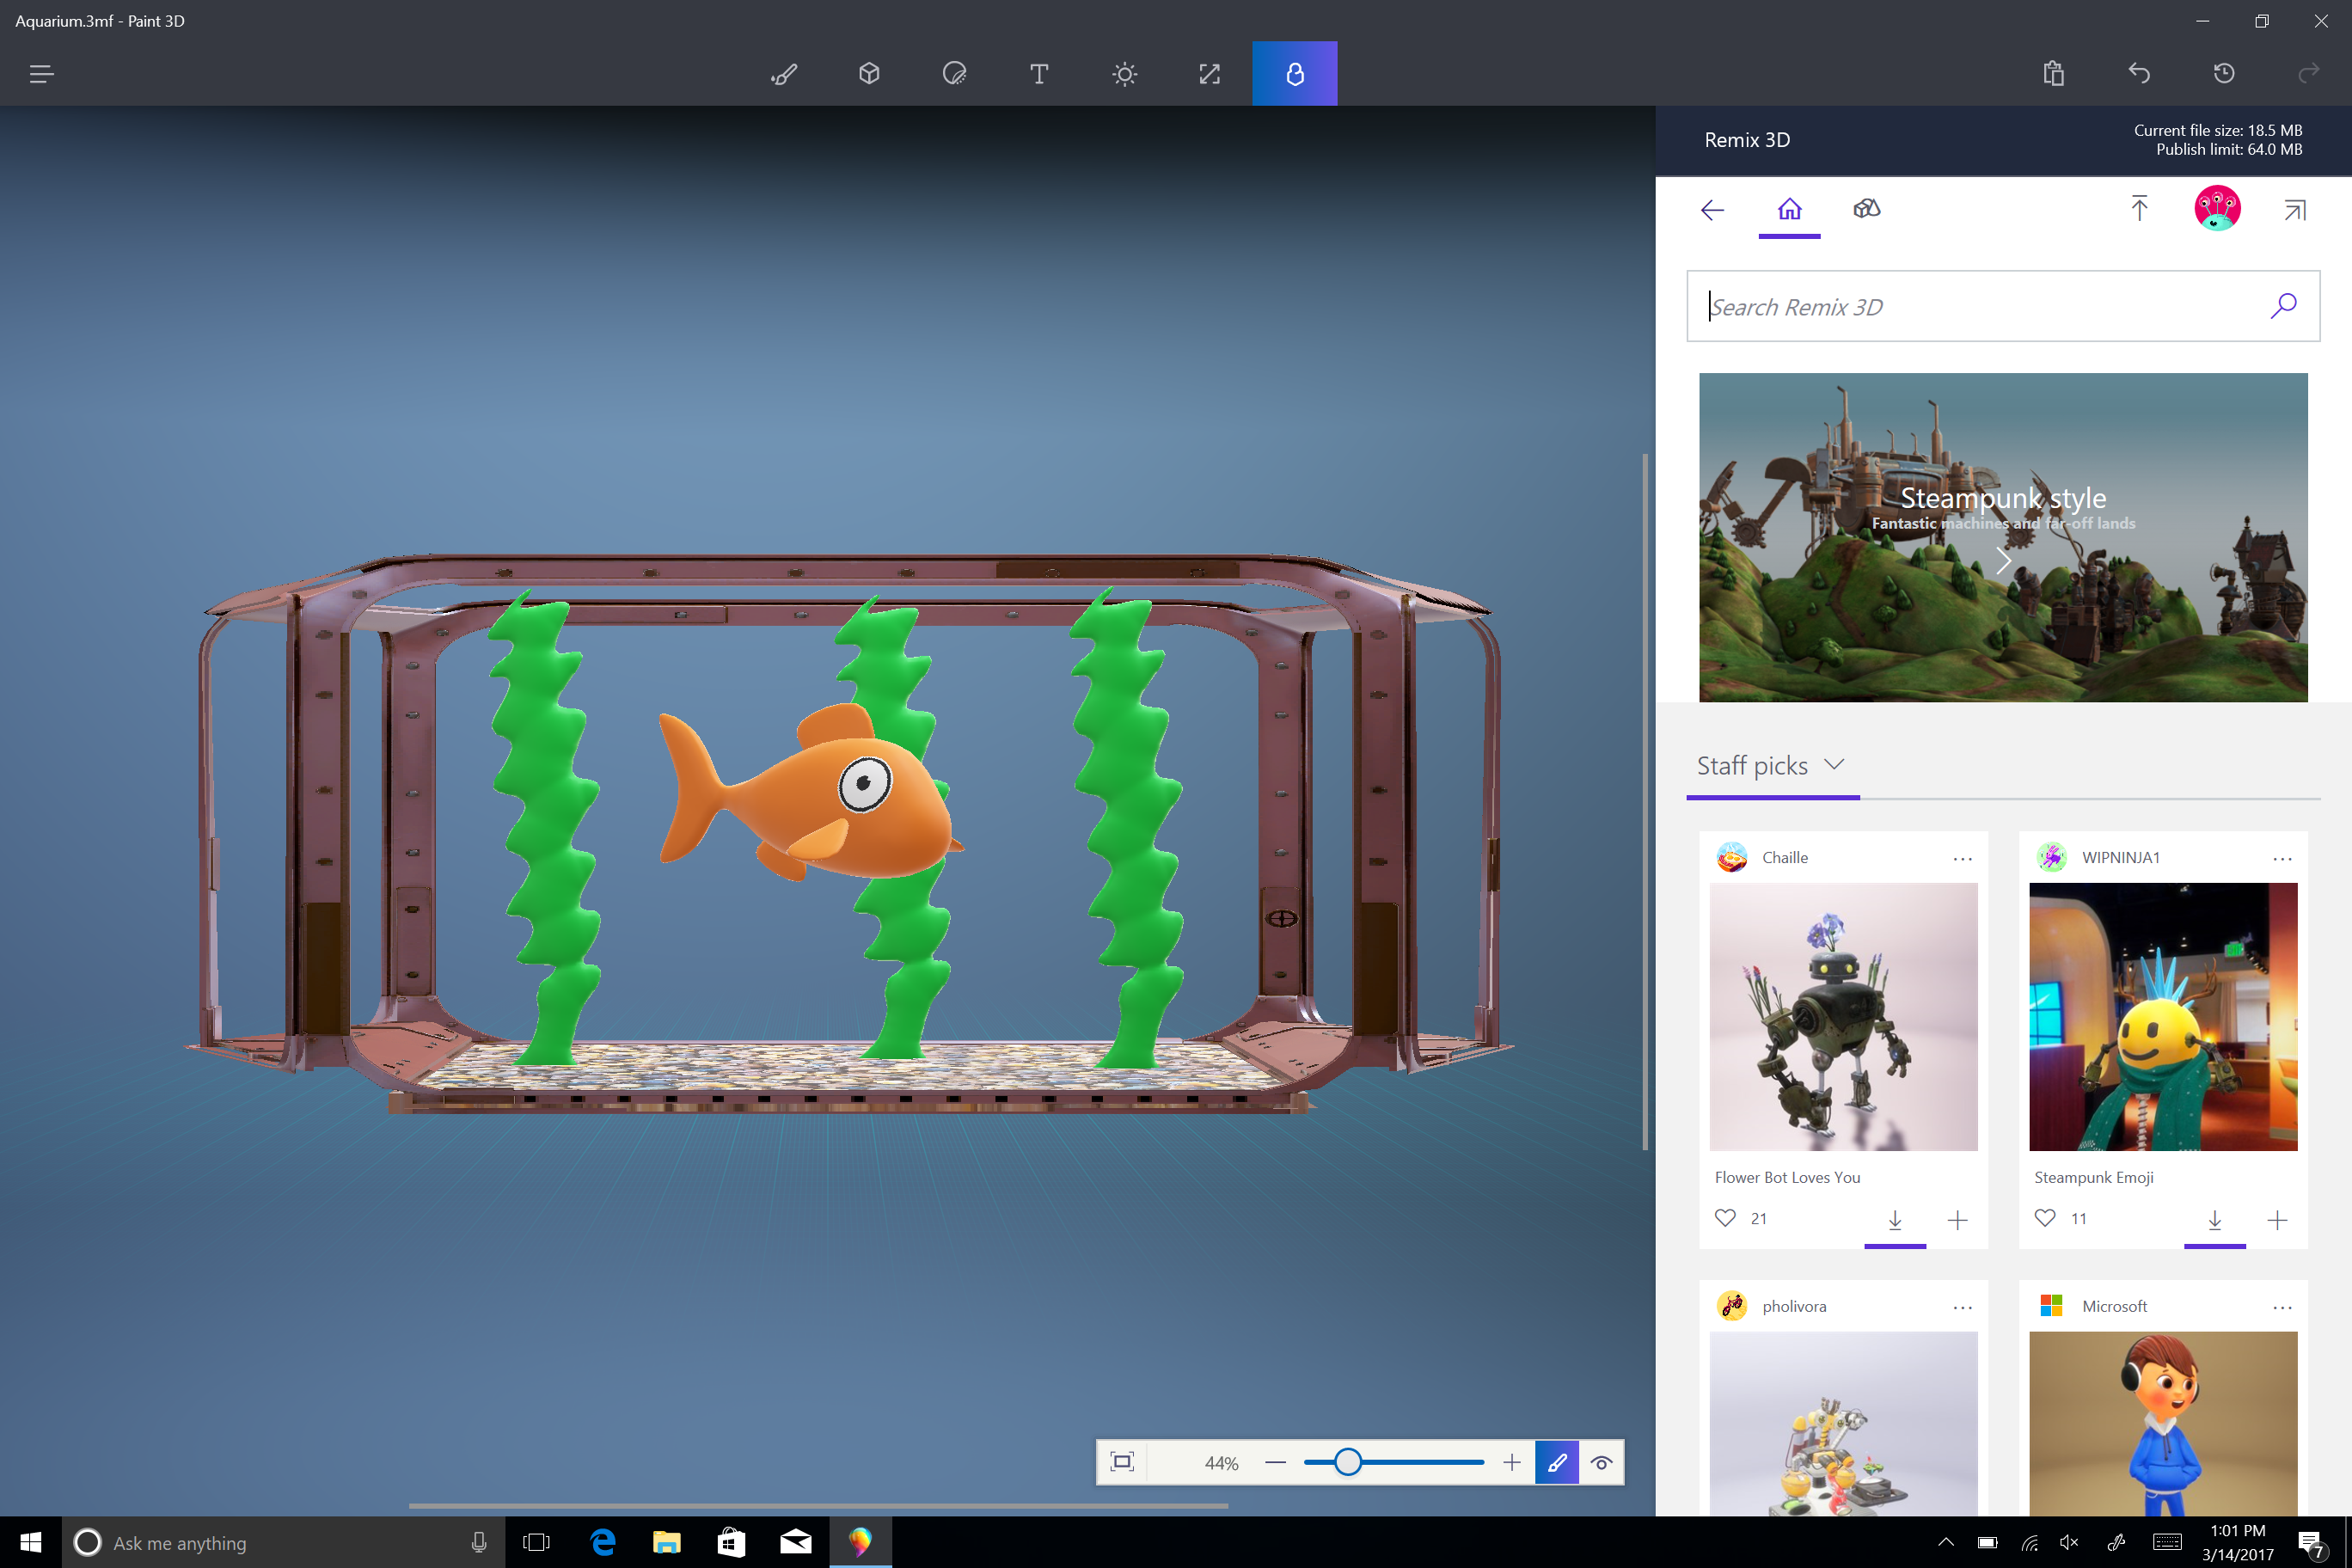 3D goldfish inside a fish bowl as created in the new Paint 3D app in Windows 10 as part of the Windows 10 Creators Update 